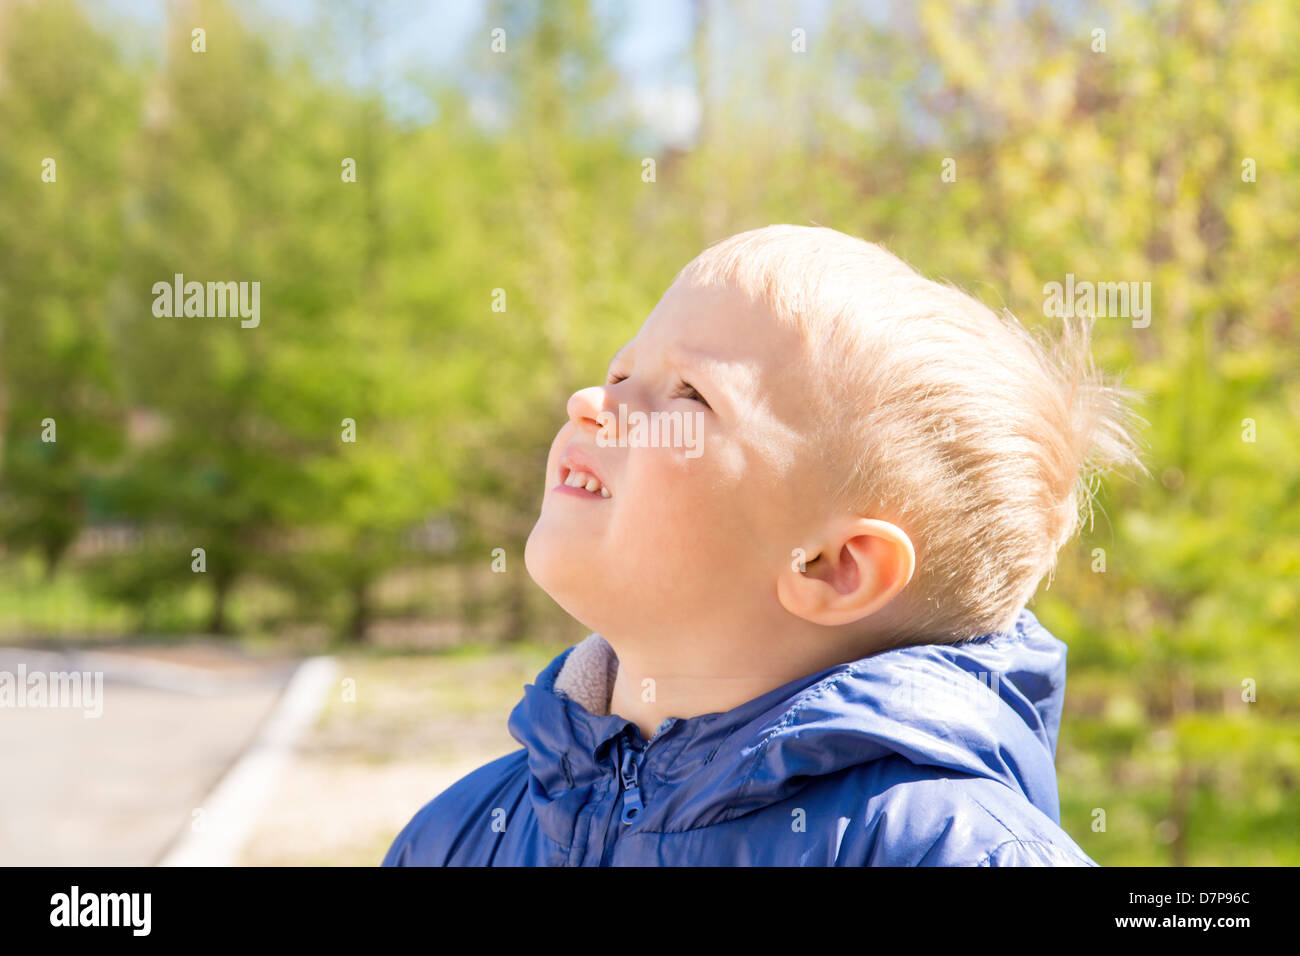 Happy smiling joyful beautiful child (little boy) outdoor in spring green park (garden) looking up. Sunny close up portrait. Stock Photo